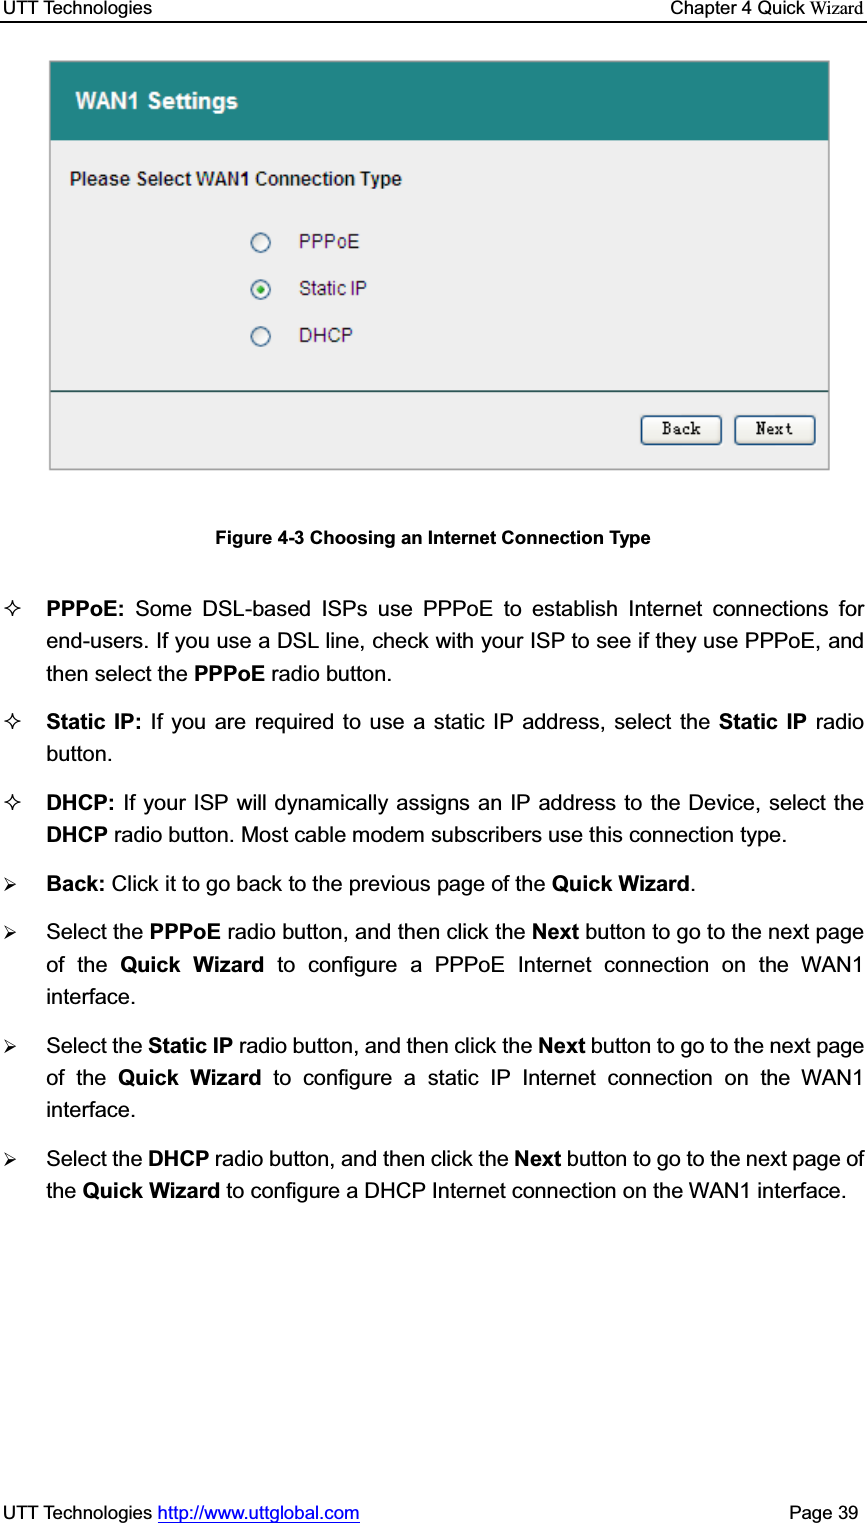 UTT Technologies    Chapter 4 Quick WizardUTT Technologies http://www.uttglobal.com                                              Page 39 Figure 4-3 Choosing an Internet Connection Type PPPoE:  Some DSL-based ISPs use PPPoE to establish Internet connections for end-users. If you use a DSL line, check with your ISP to see if they use PPPoE, andthen select the PPPoE radio button.   Static IP: If you are required to use a static IP address, select the Static IP radio button. DHCP: If your ISP will dynamically assigns an IP address to the Device, select theDHCP radio button. Most cable modem subscribers use this connection type. ¾Back: Click it to go back to the previous page of the Quick Wizard.¾Select the PPPoE radio button, and then click the Next button to go to the next page of the Quick Wizard to configure a PPPoE Internet connection on the WAN1 interface.¾Select the Static IP radio button, and then click the Next button to go to the next page of the Quick Wizard to configure a static IP Internet connection on the WAN1 interface.¾Select the DHCP radio button, and then click the Next button to go to the next page of the Quick Wizard to configure a DHCP Internet connection on the WAN1 interface.